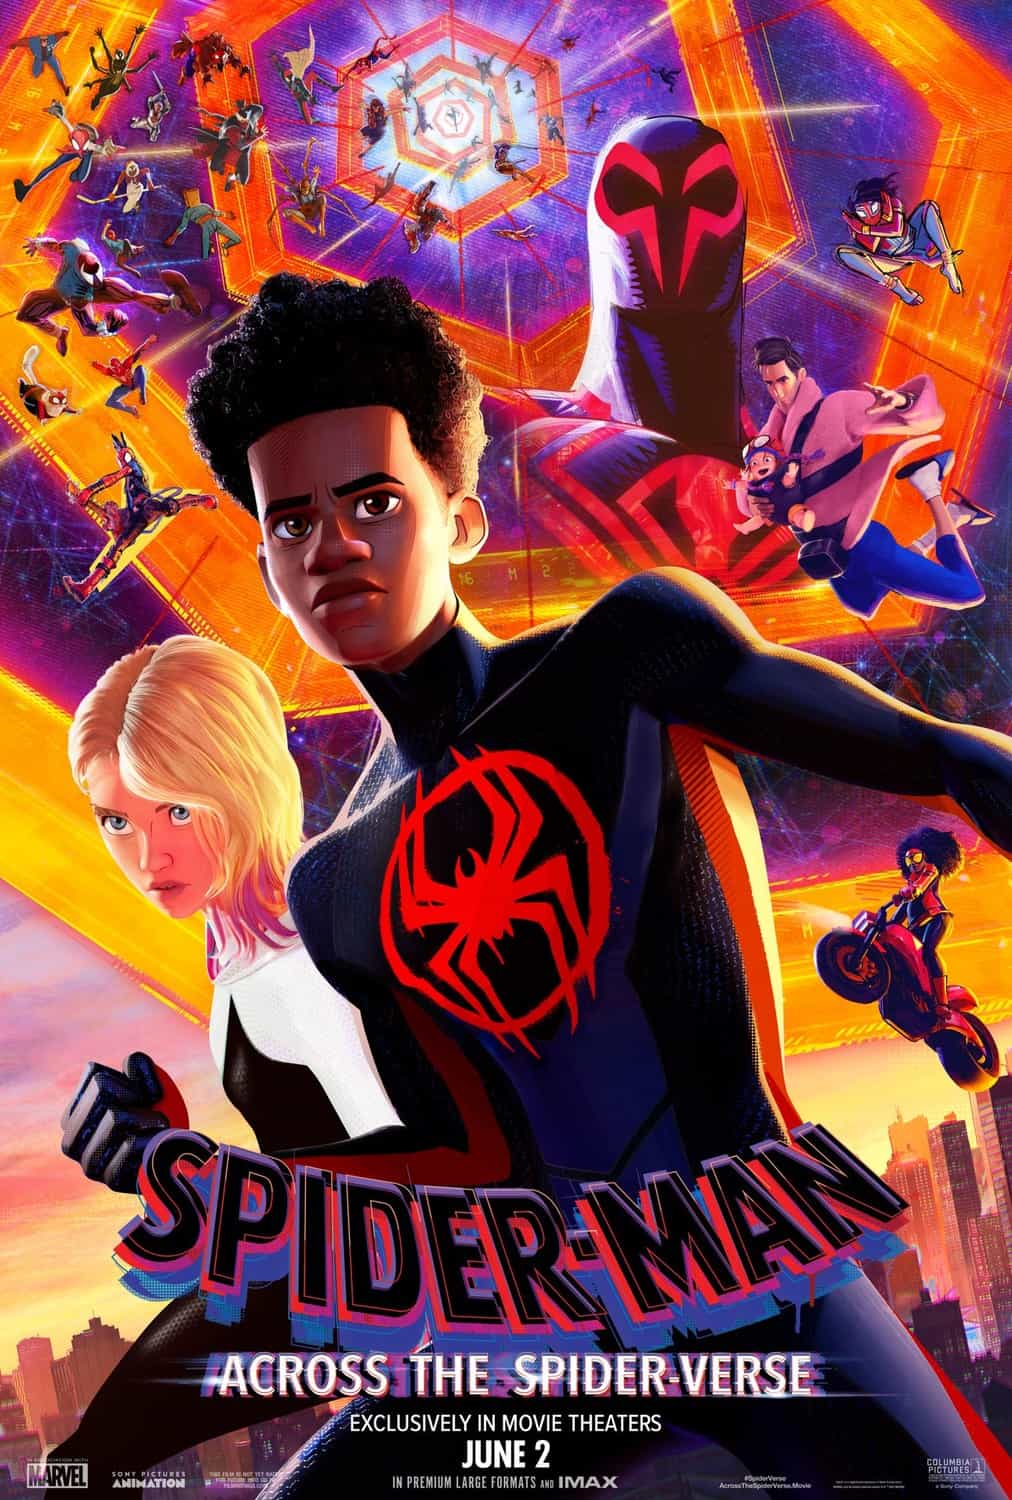 A new trailer released for Spider-Man: Across the Spider-Verse starring Shameik Moore - movie UK release date 9th June 2023 #spidermanacrossthespiderverse